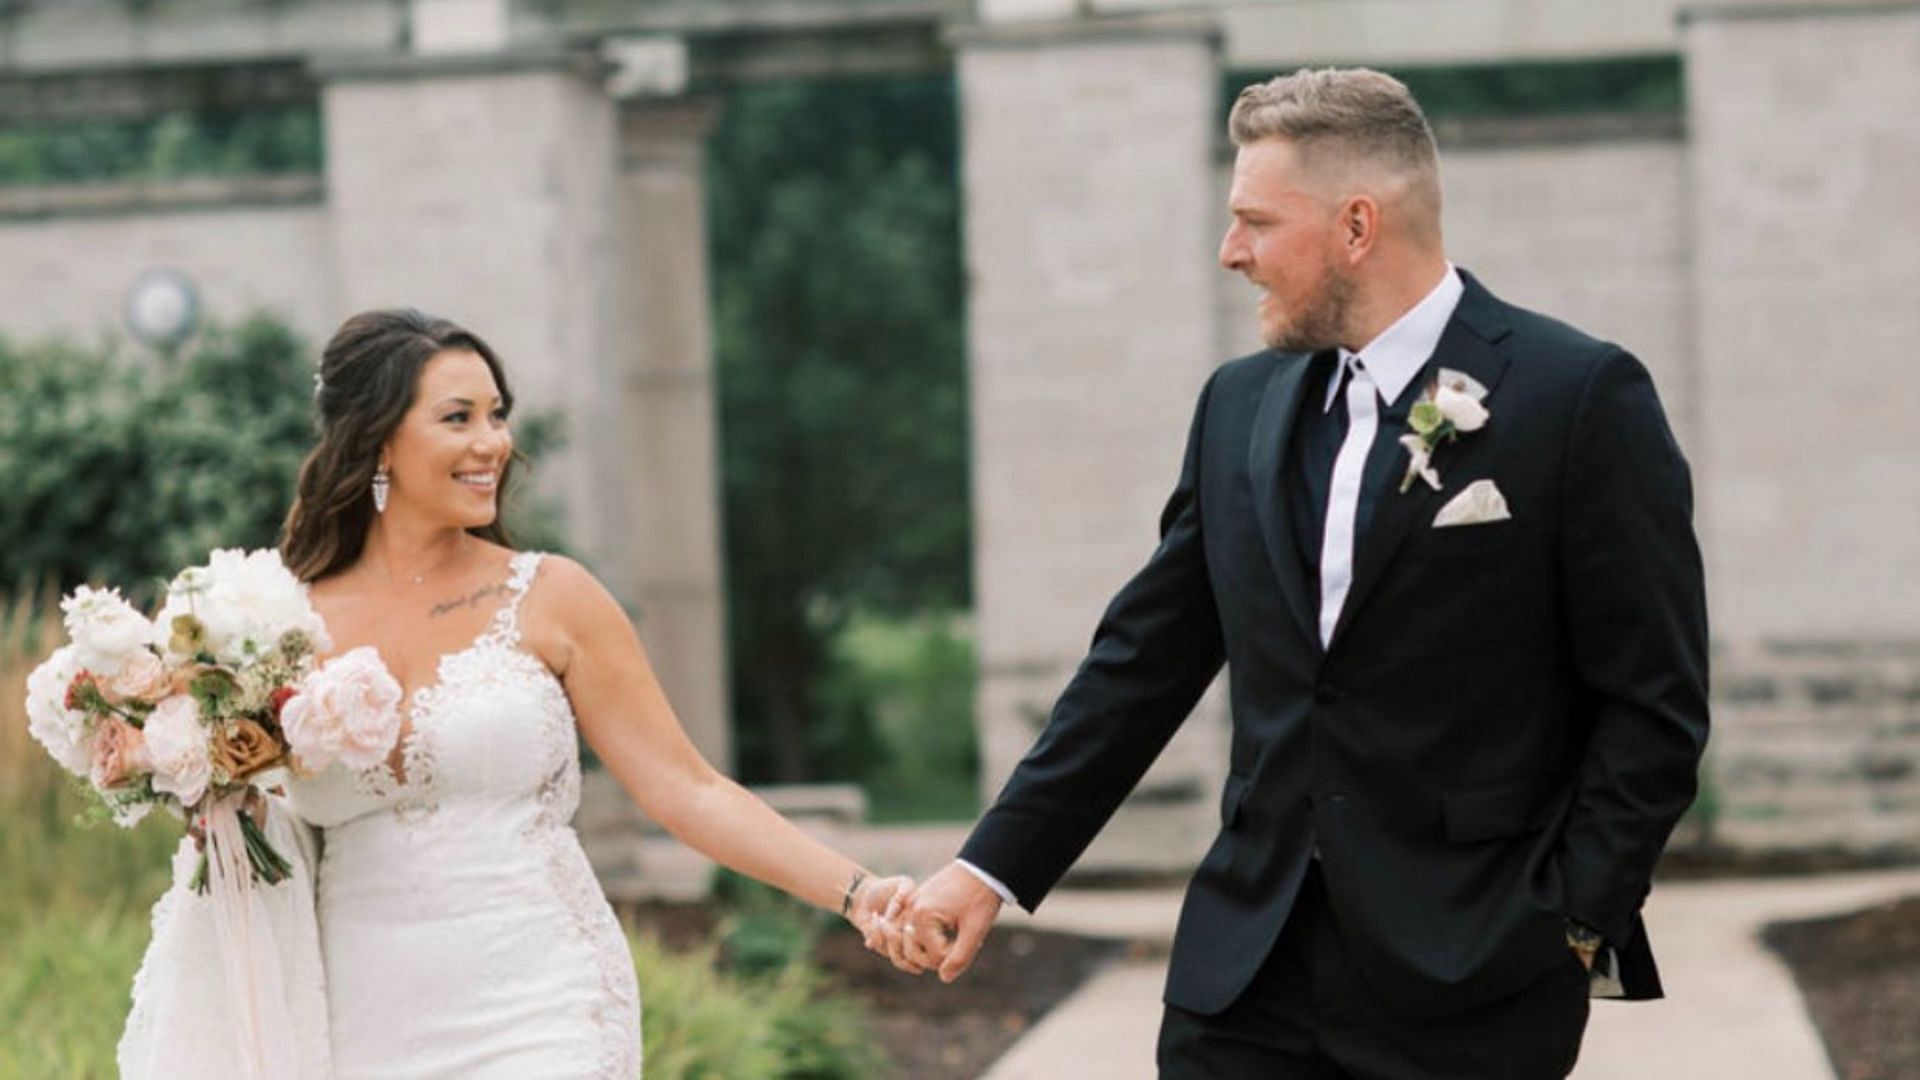 Pat McAfee with his wife Samantha McAfee on their wedding day